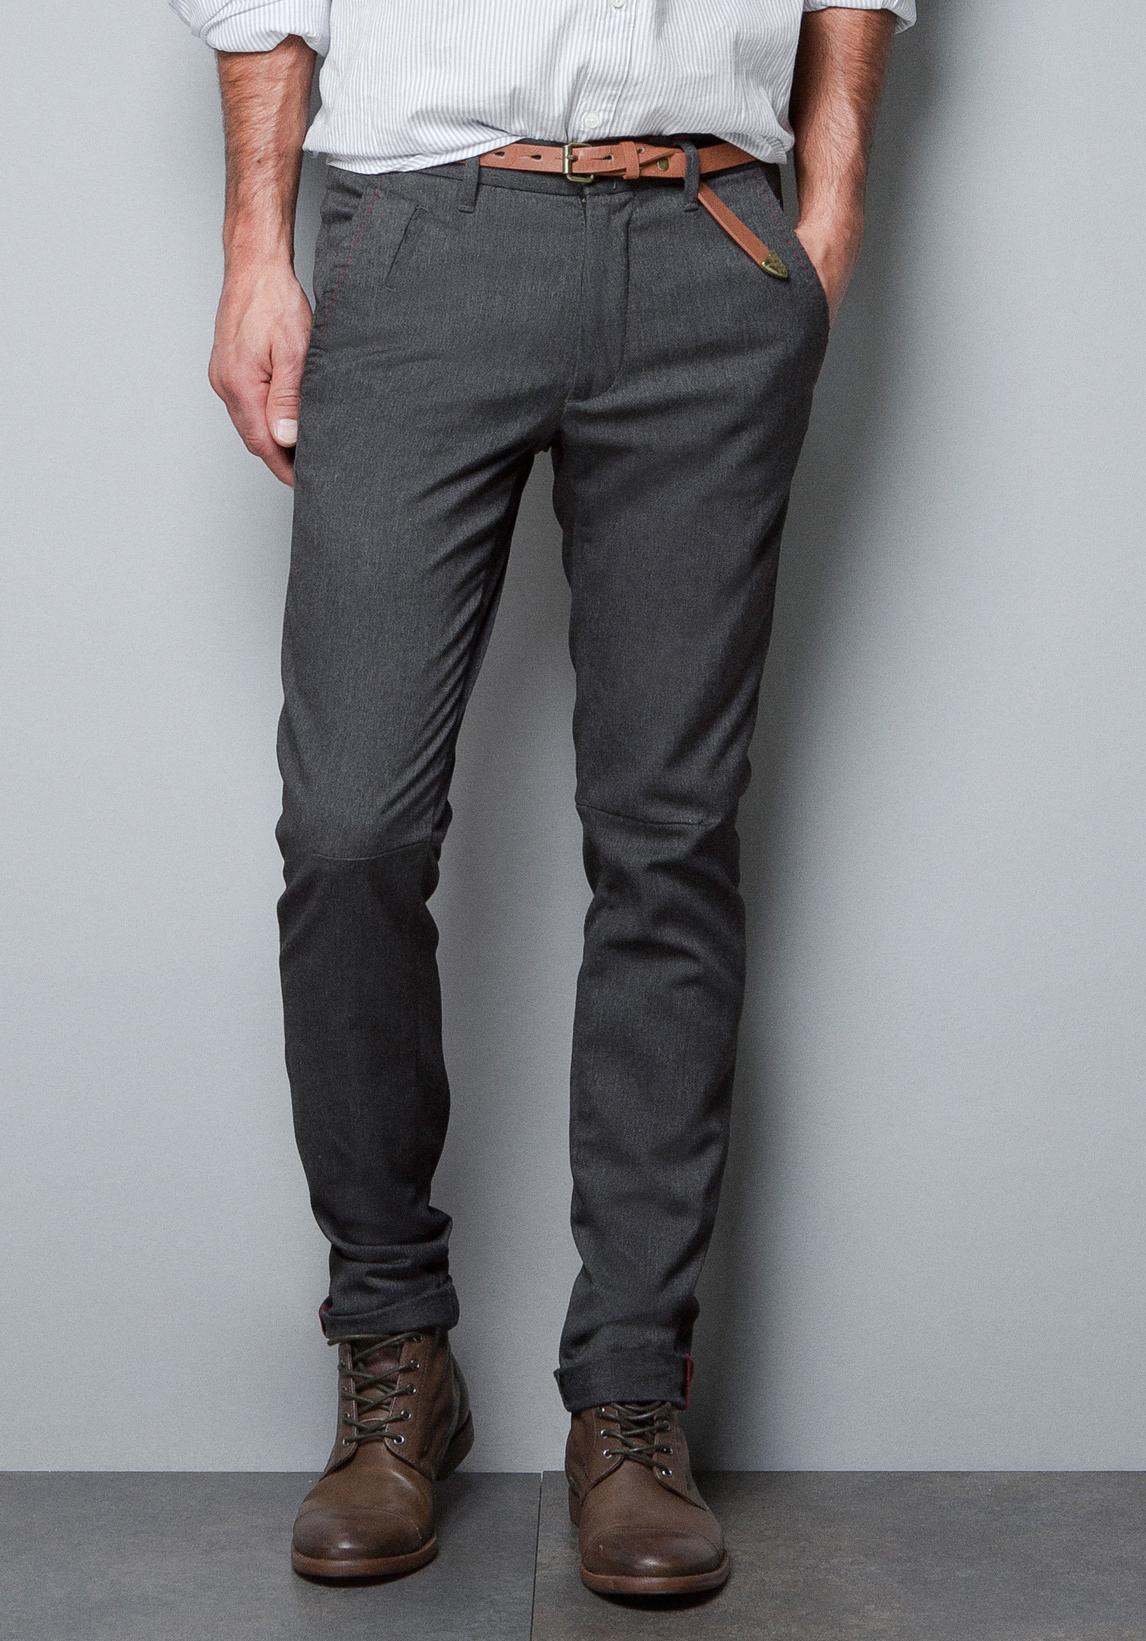 gray chino pants outfit